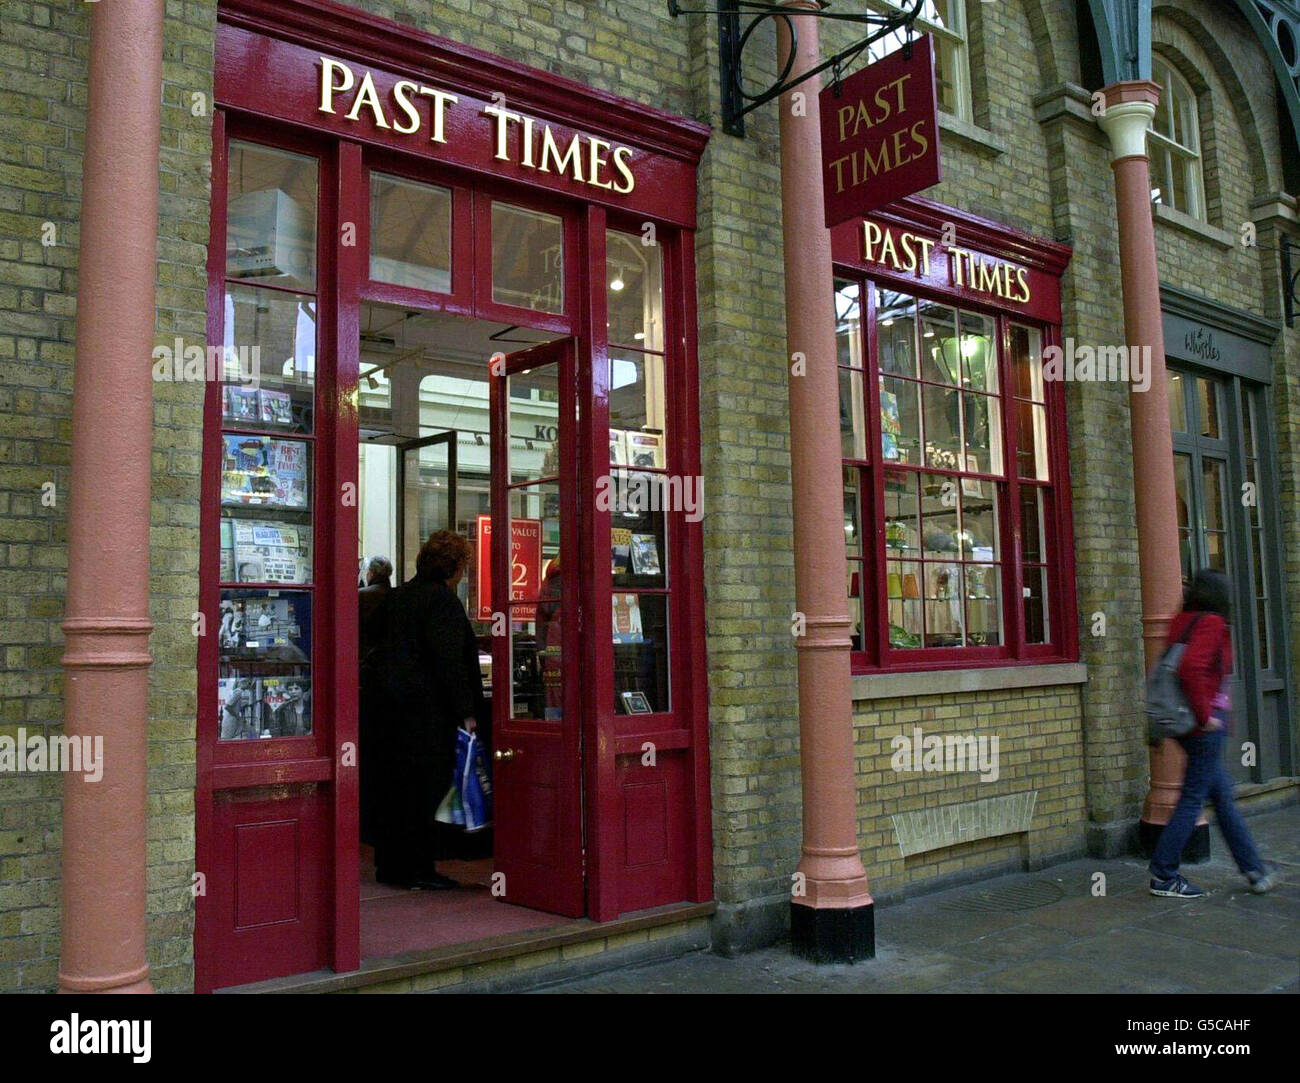 The Covent Garden branch of the gift shop chain, Past Times, which has gone into administration. The company is looking for a buyer to support its 74 branches and 721 employees across the UK. Stock Photo